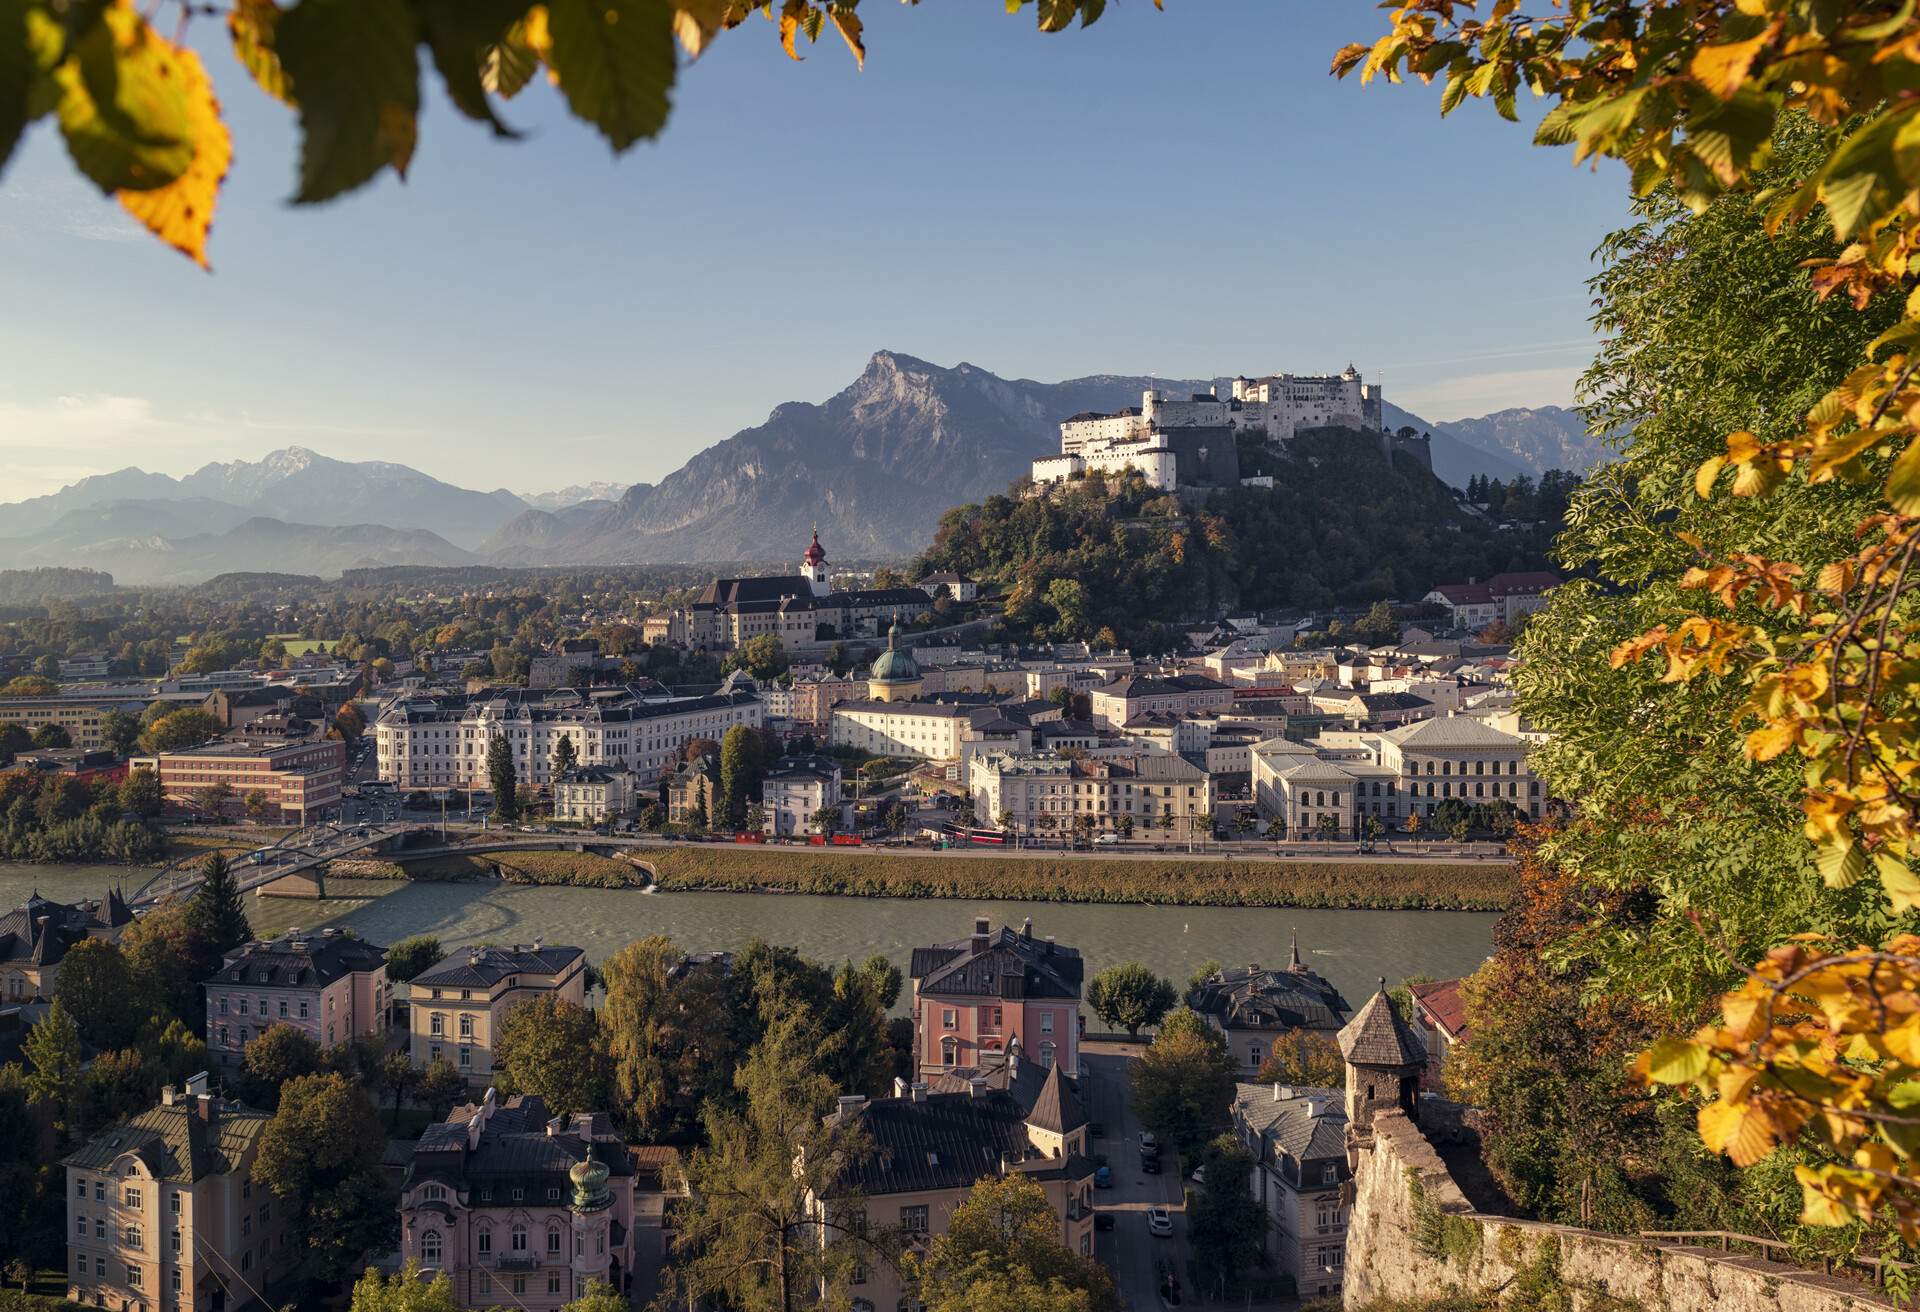 Autumn panorama of the old town in Salzburg, Austria - view from Kapuziner Hill.